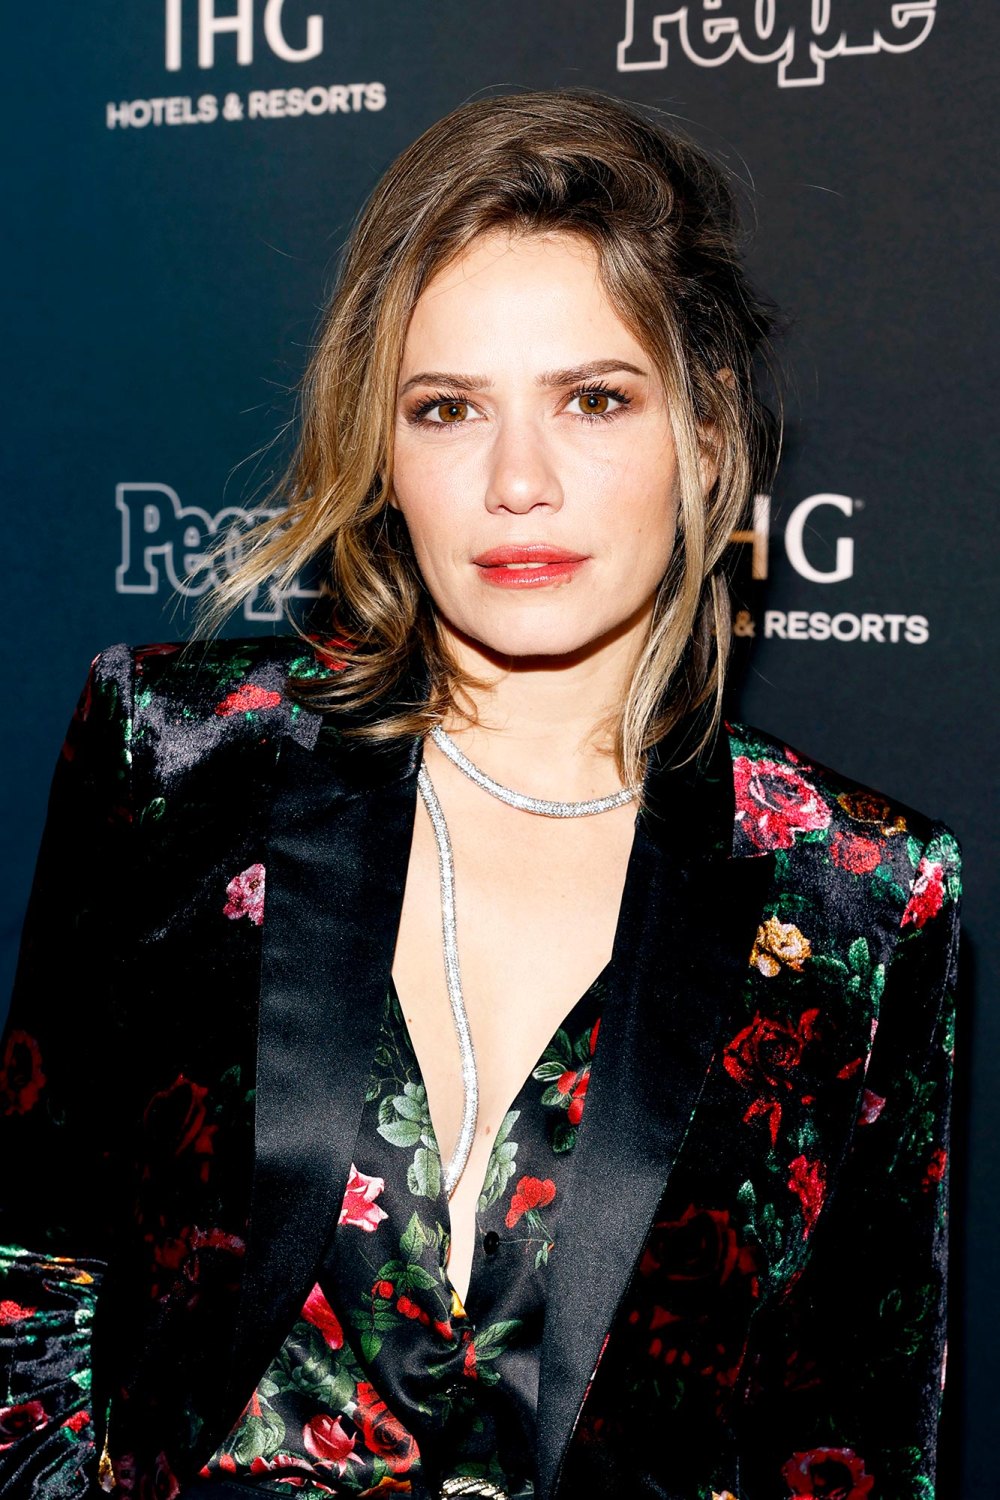 One Tree Hill Alum Bethany Joy Lenzs Quotes About Her Involvement in The Big Family House Cult